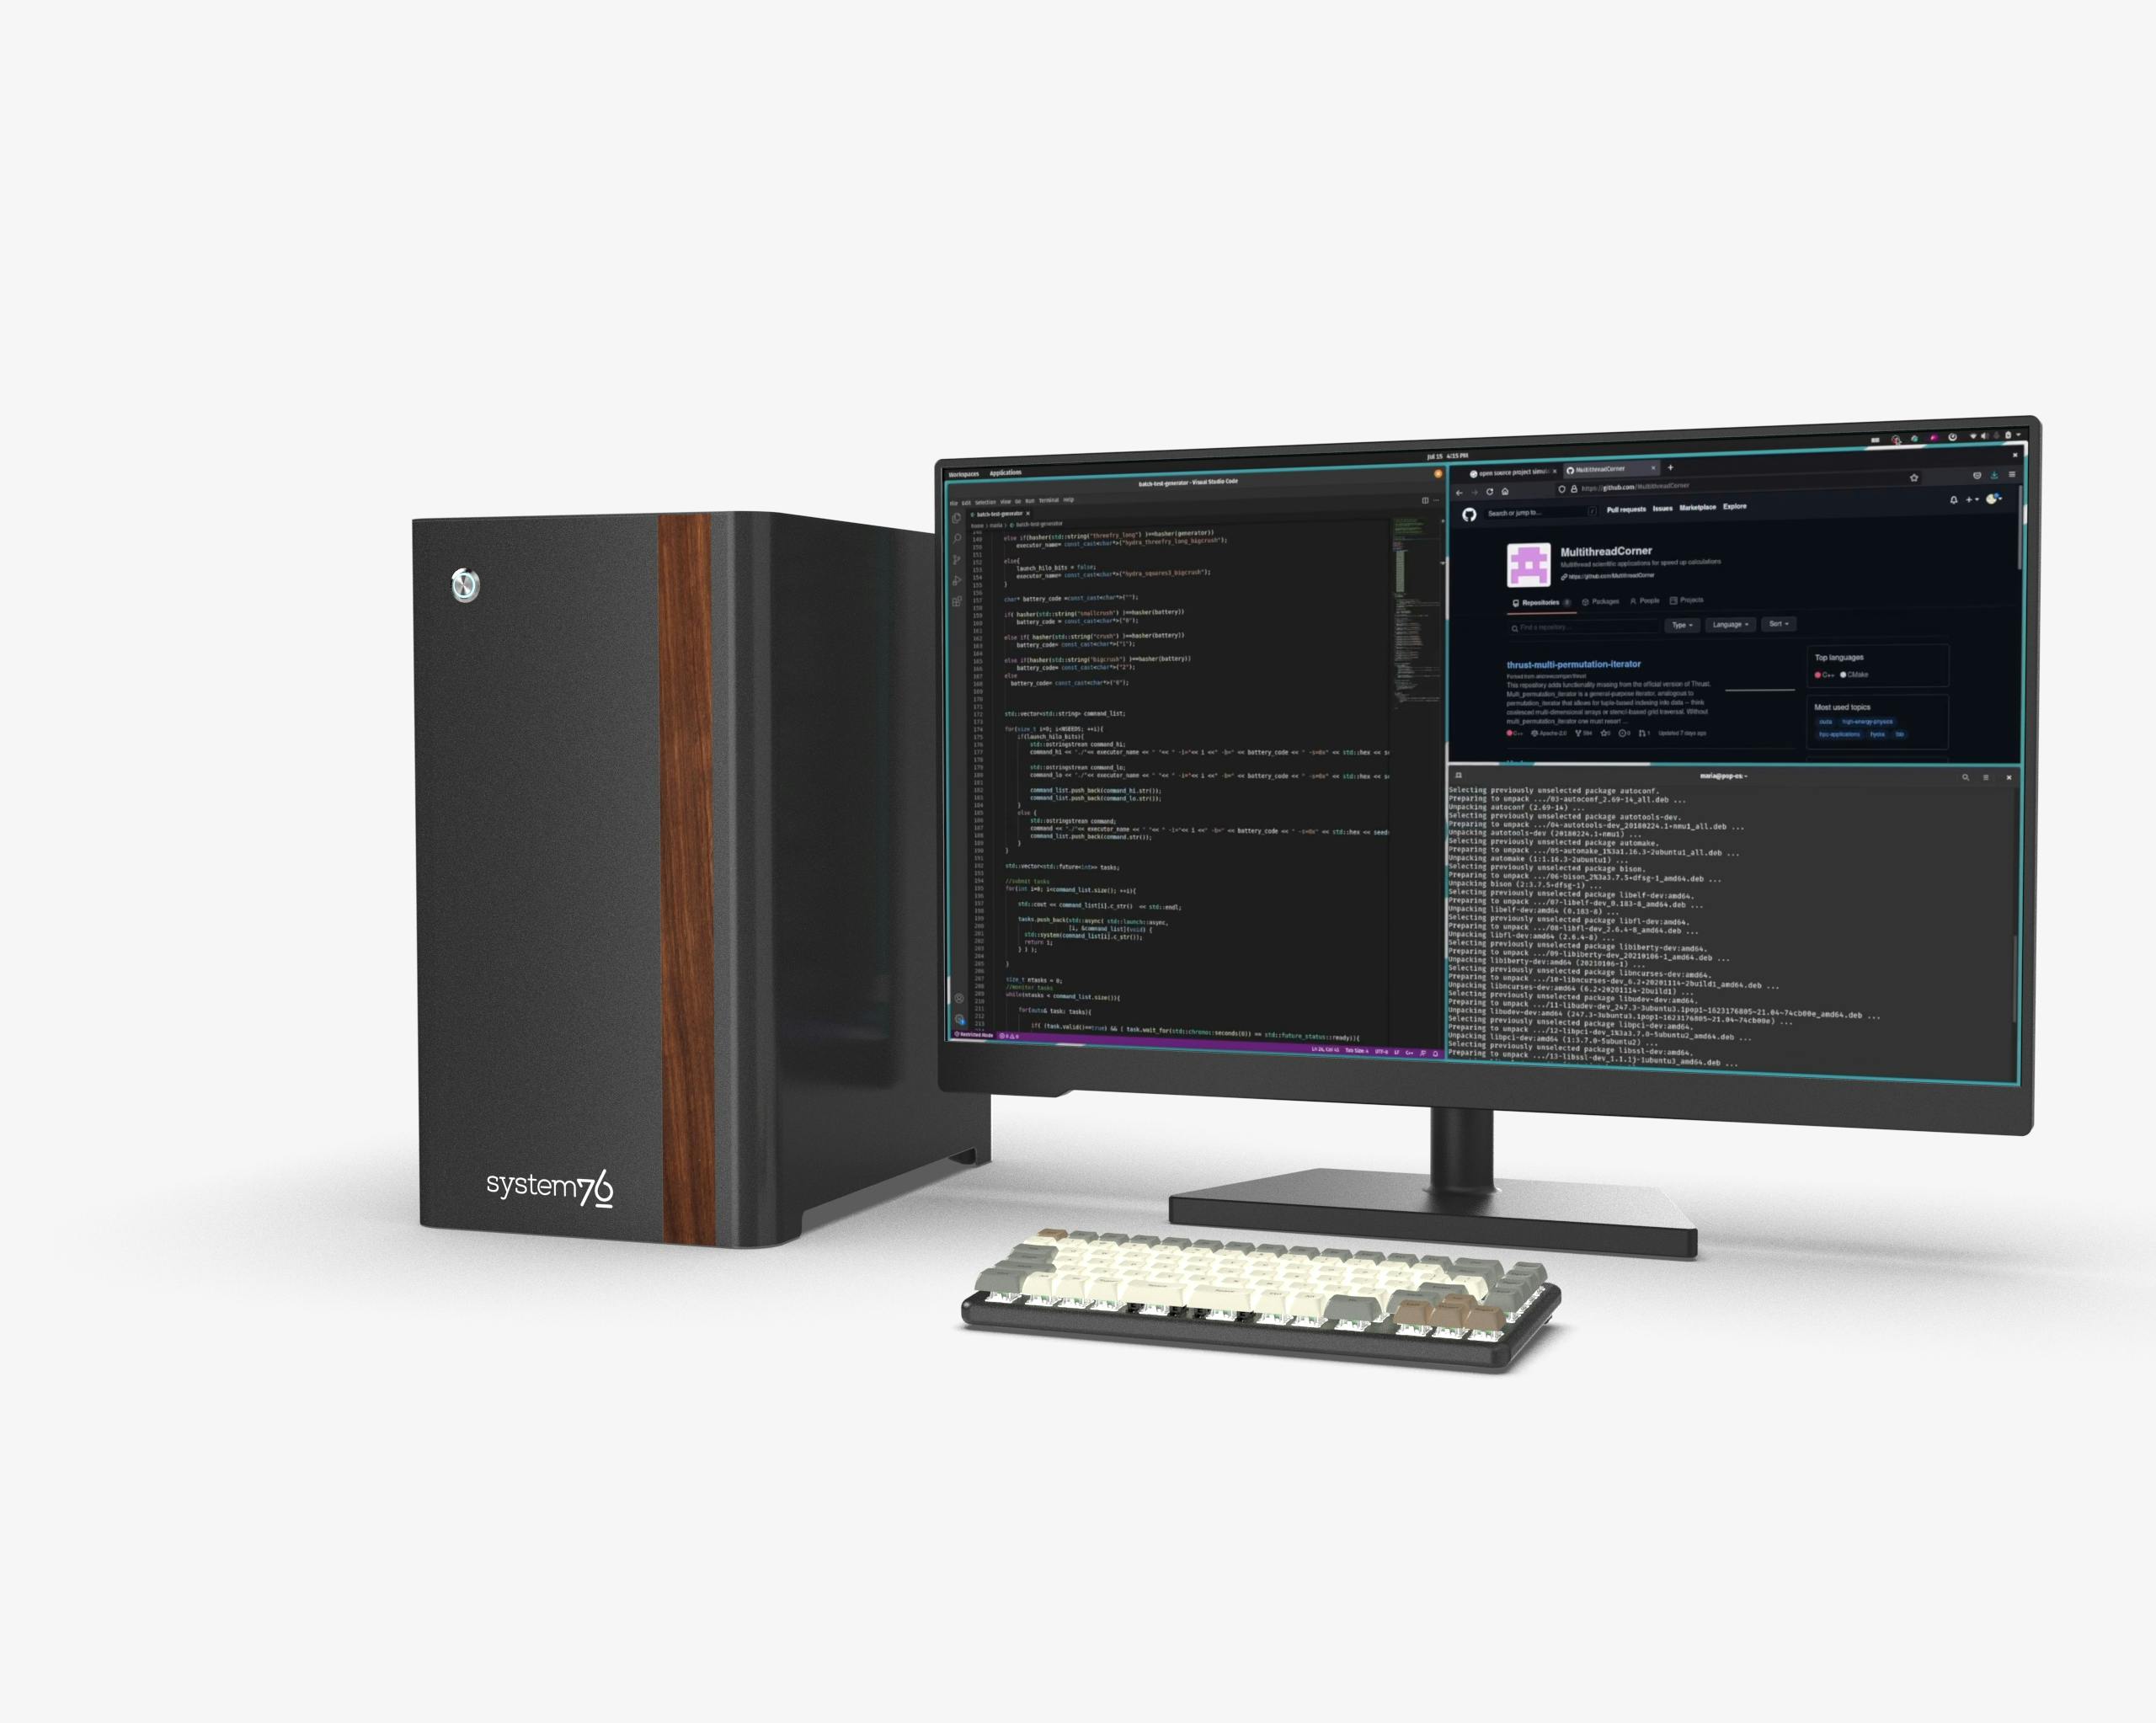 Gif of the Thelio Major connected to an external display. Three windows are tiled using Pop!_OS and show 3D modeling alongside 2D design. The workspace flips to one showing an engineer's workflow. Thelio Major caters to both users effectively.